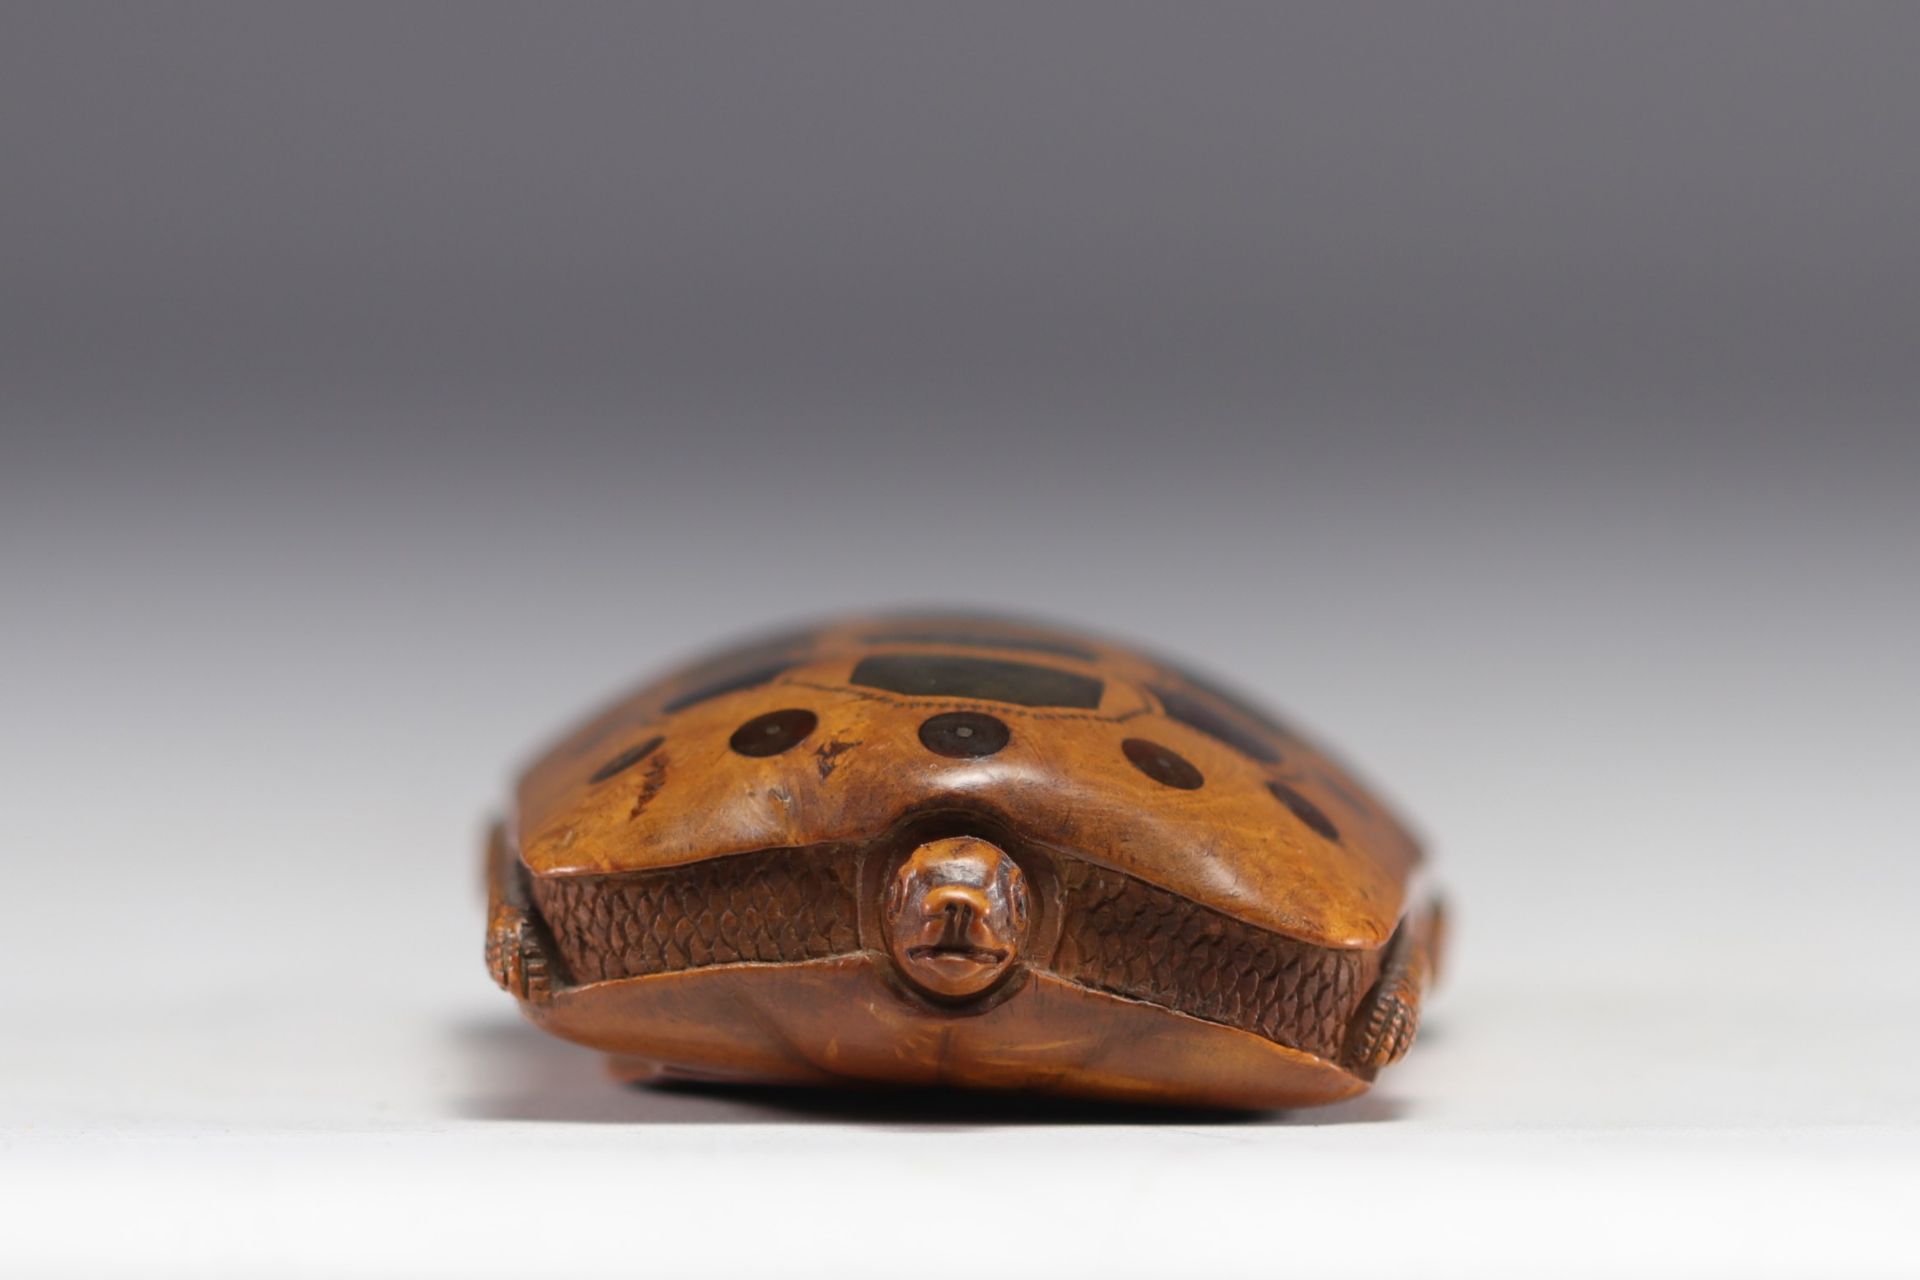 Rare snuff box in the shape of a turtle carved with inlays and nails, 19th century - Image 4 of 8